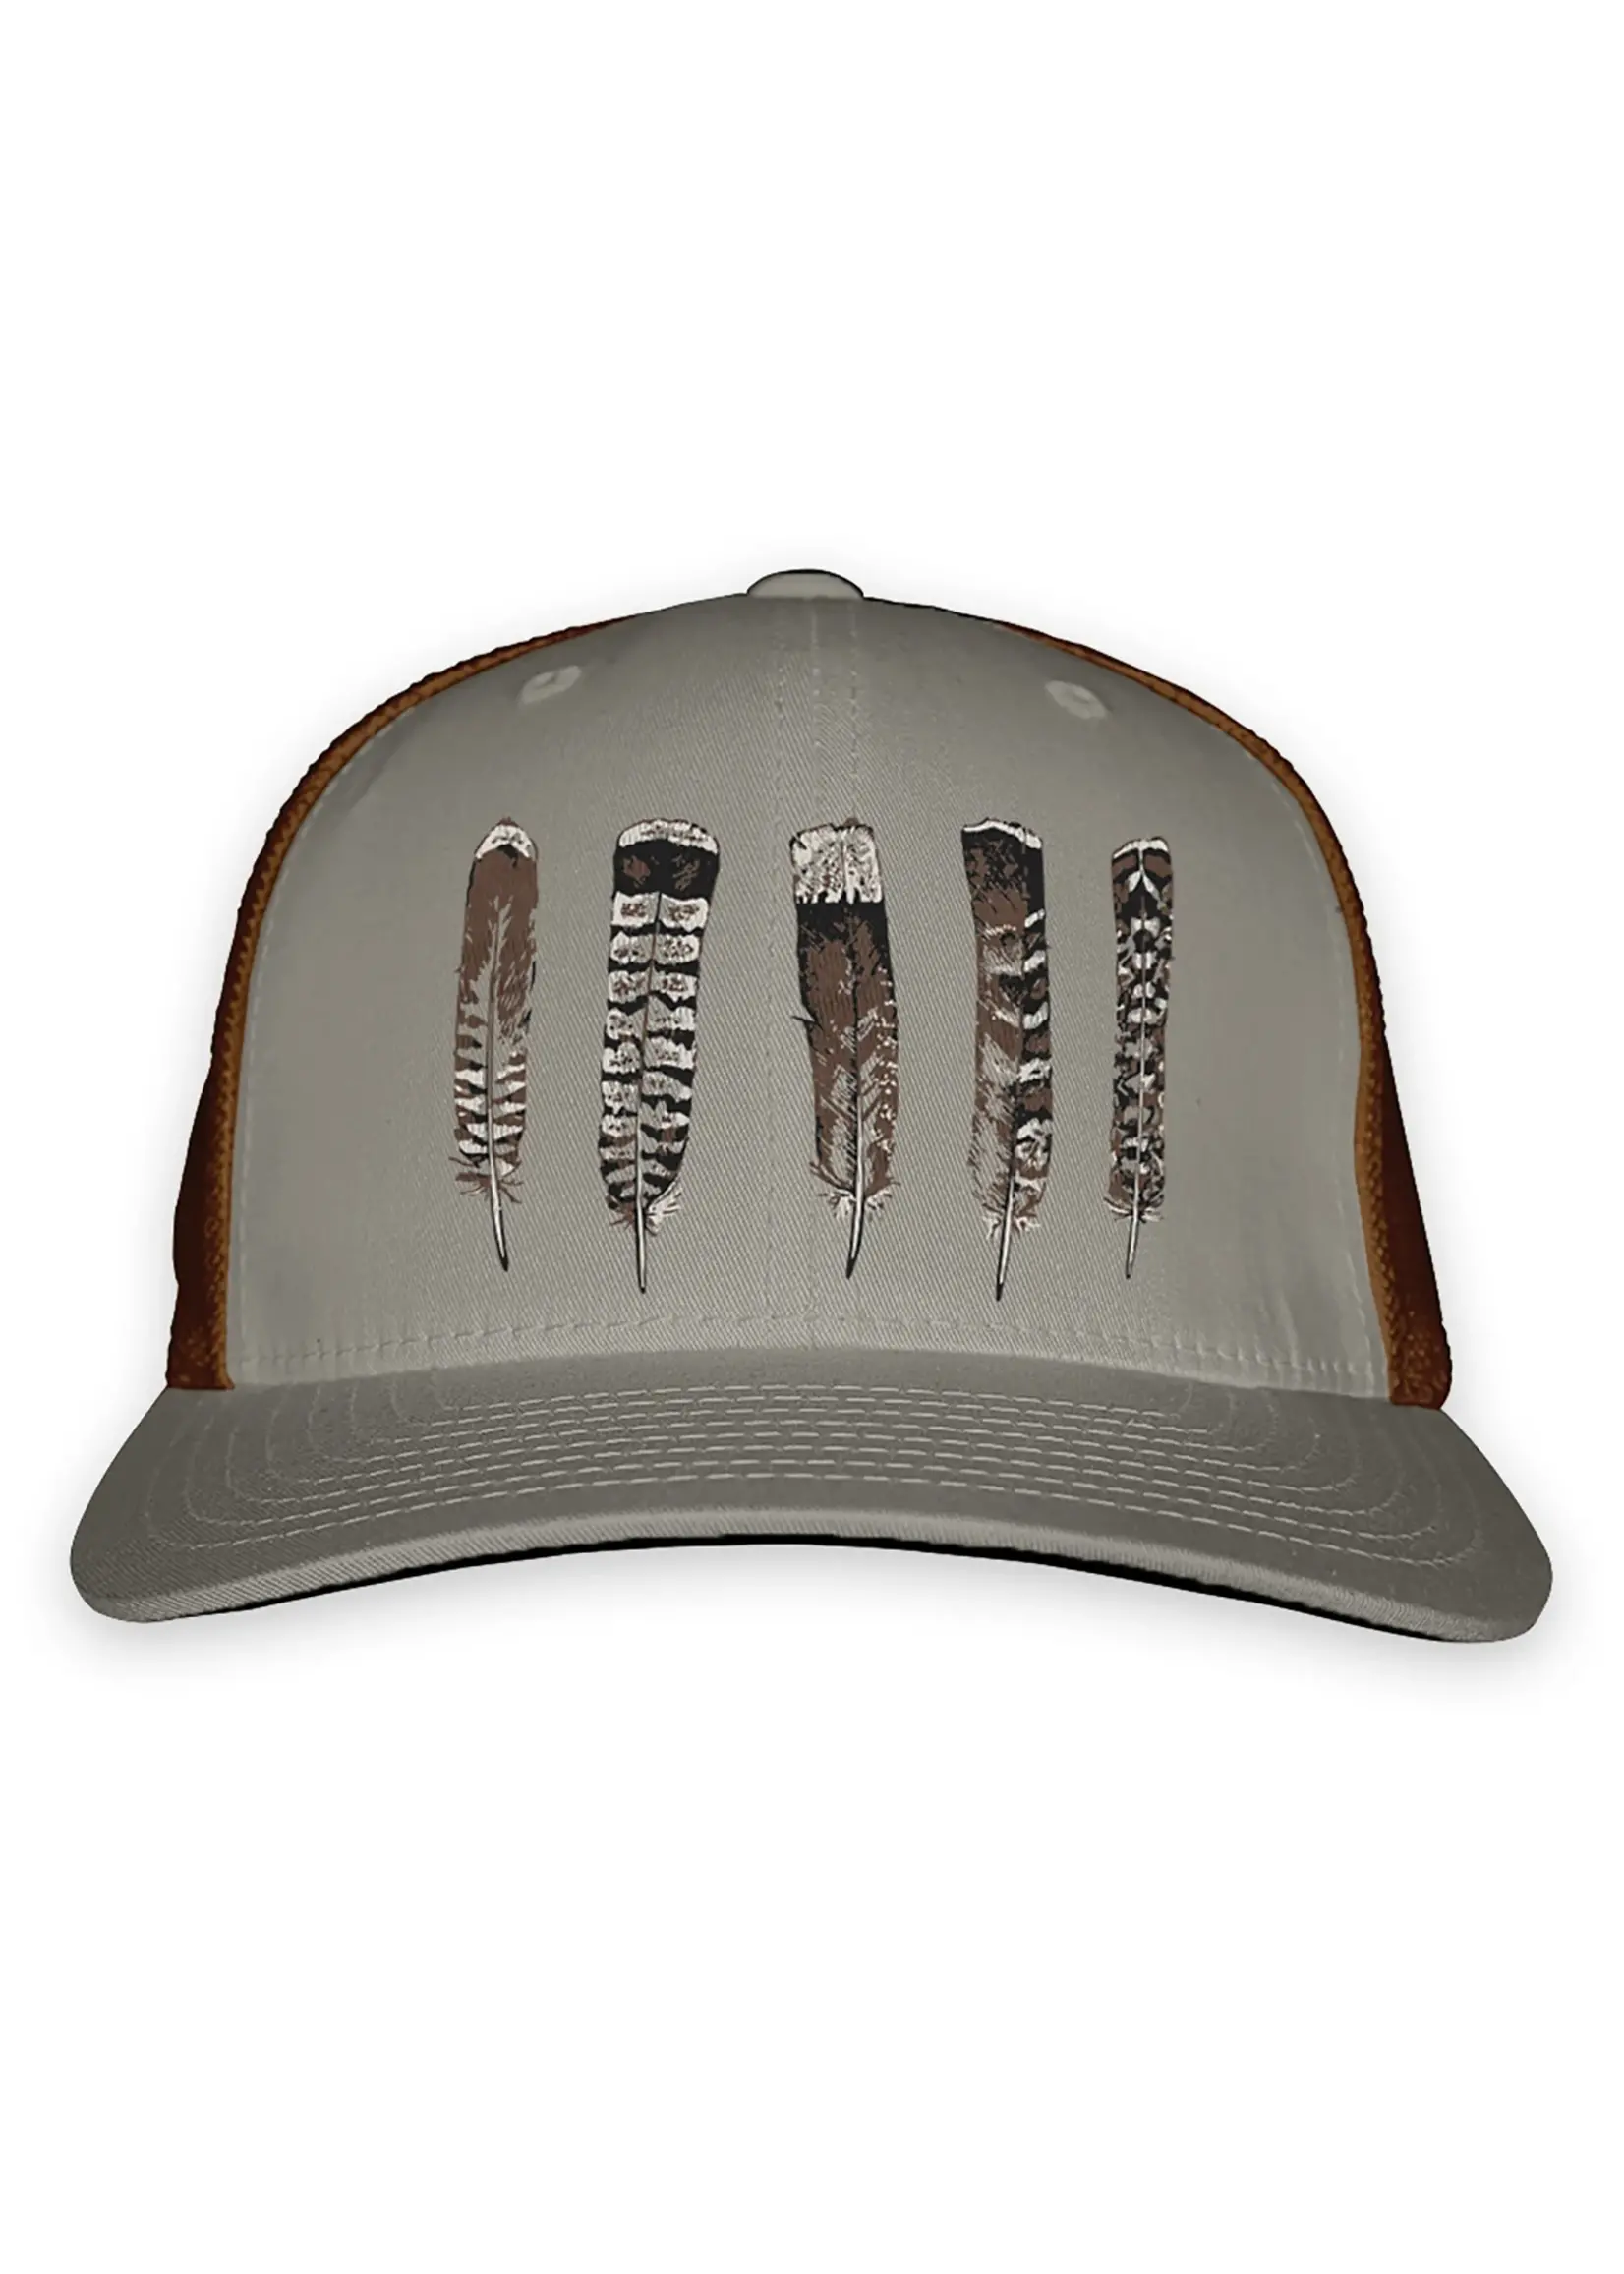 Rep Your Water Rep Your Water Grouse Feathers Standard Fit Hat